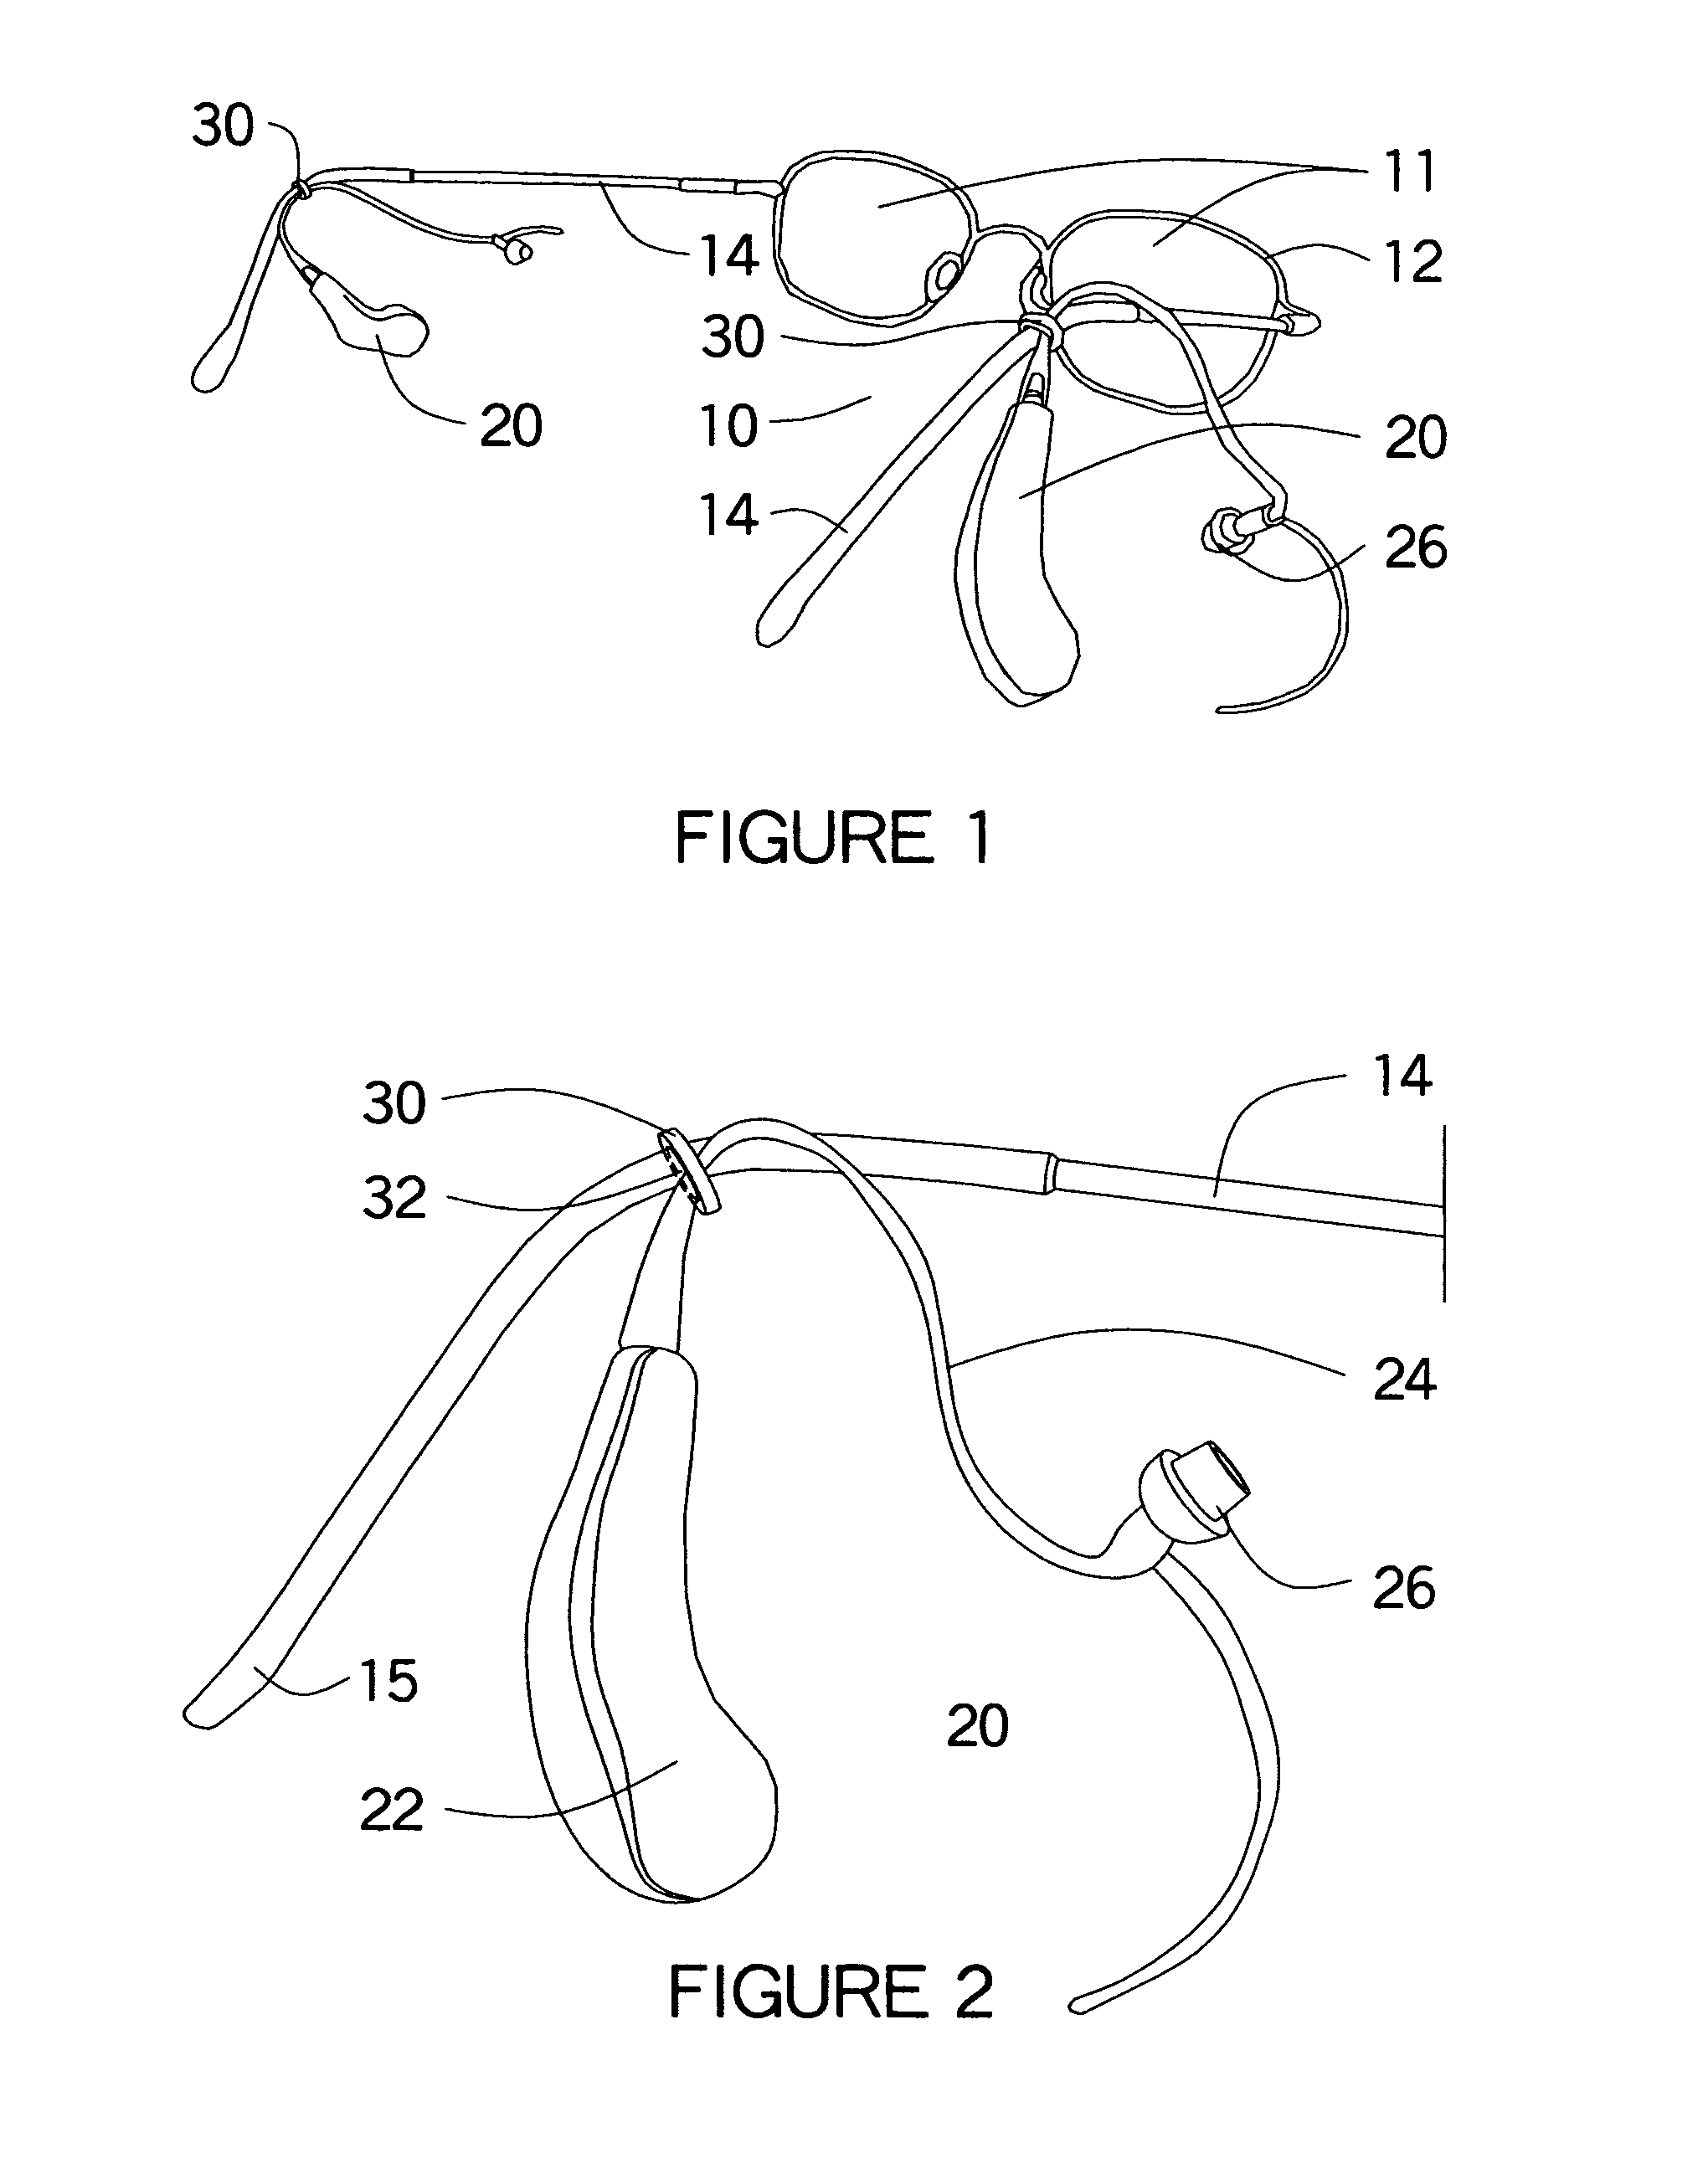 Hearing device connector for eye glasses